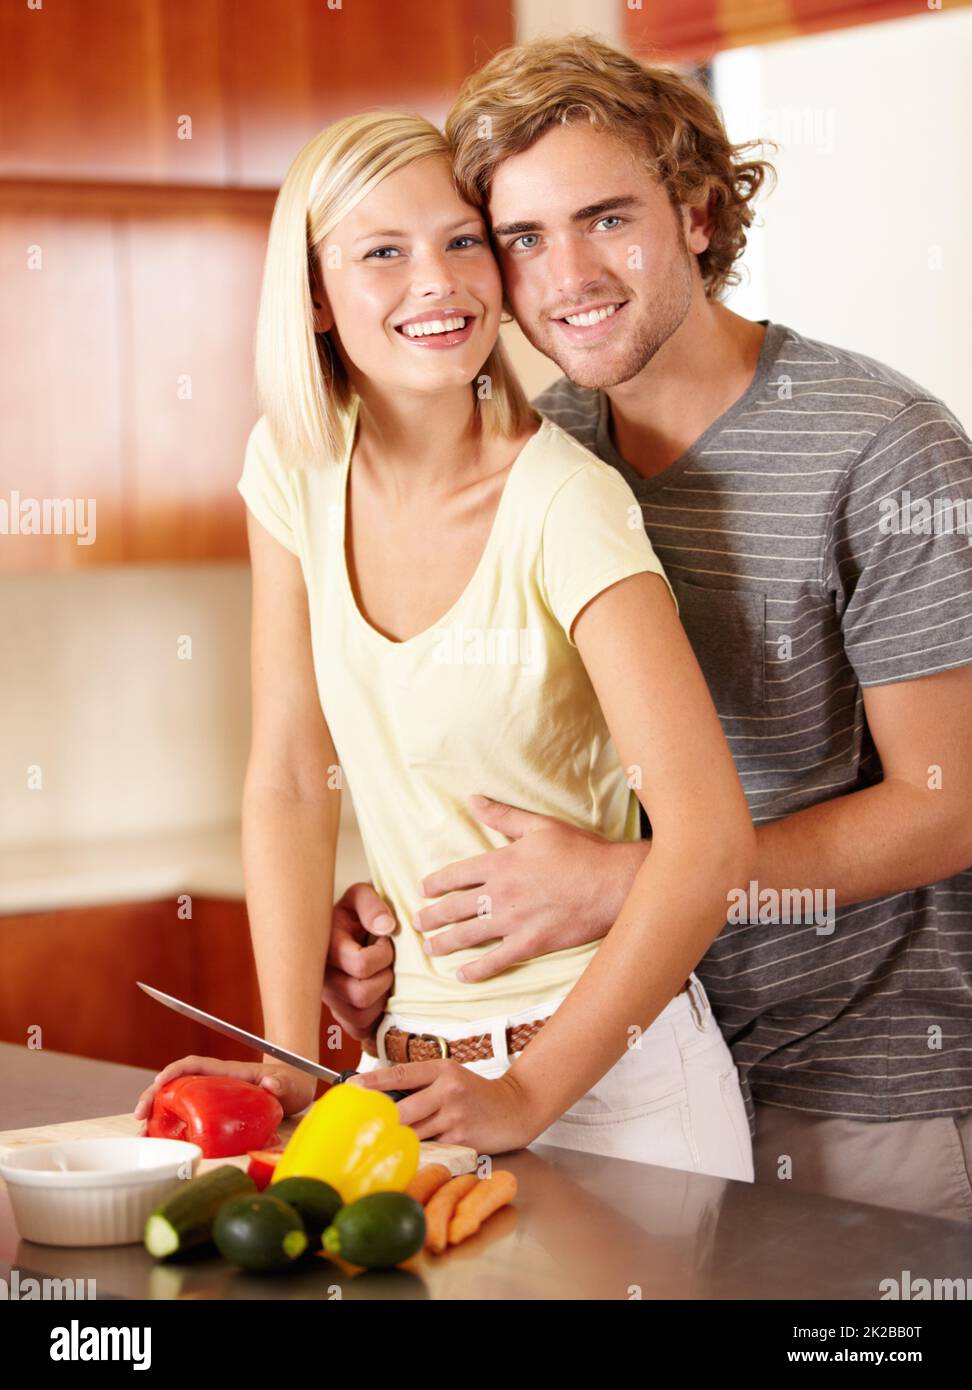 Kitchen romance. Portrait of a happy young couple standing in the kitchen. Stock Photo